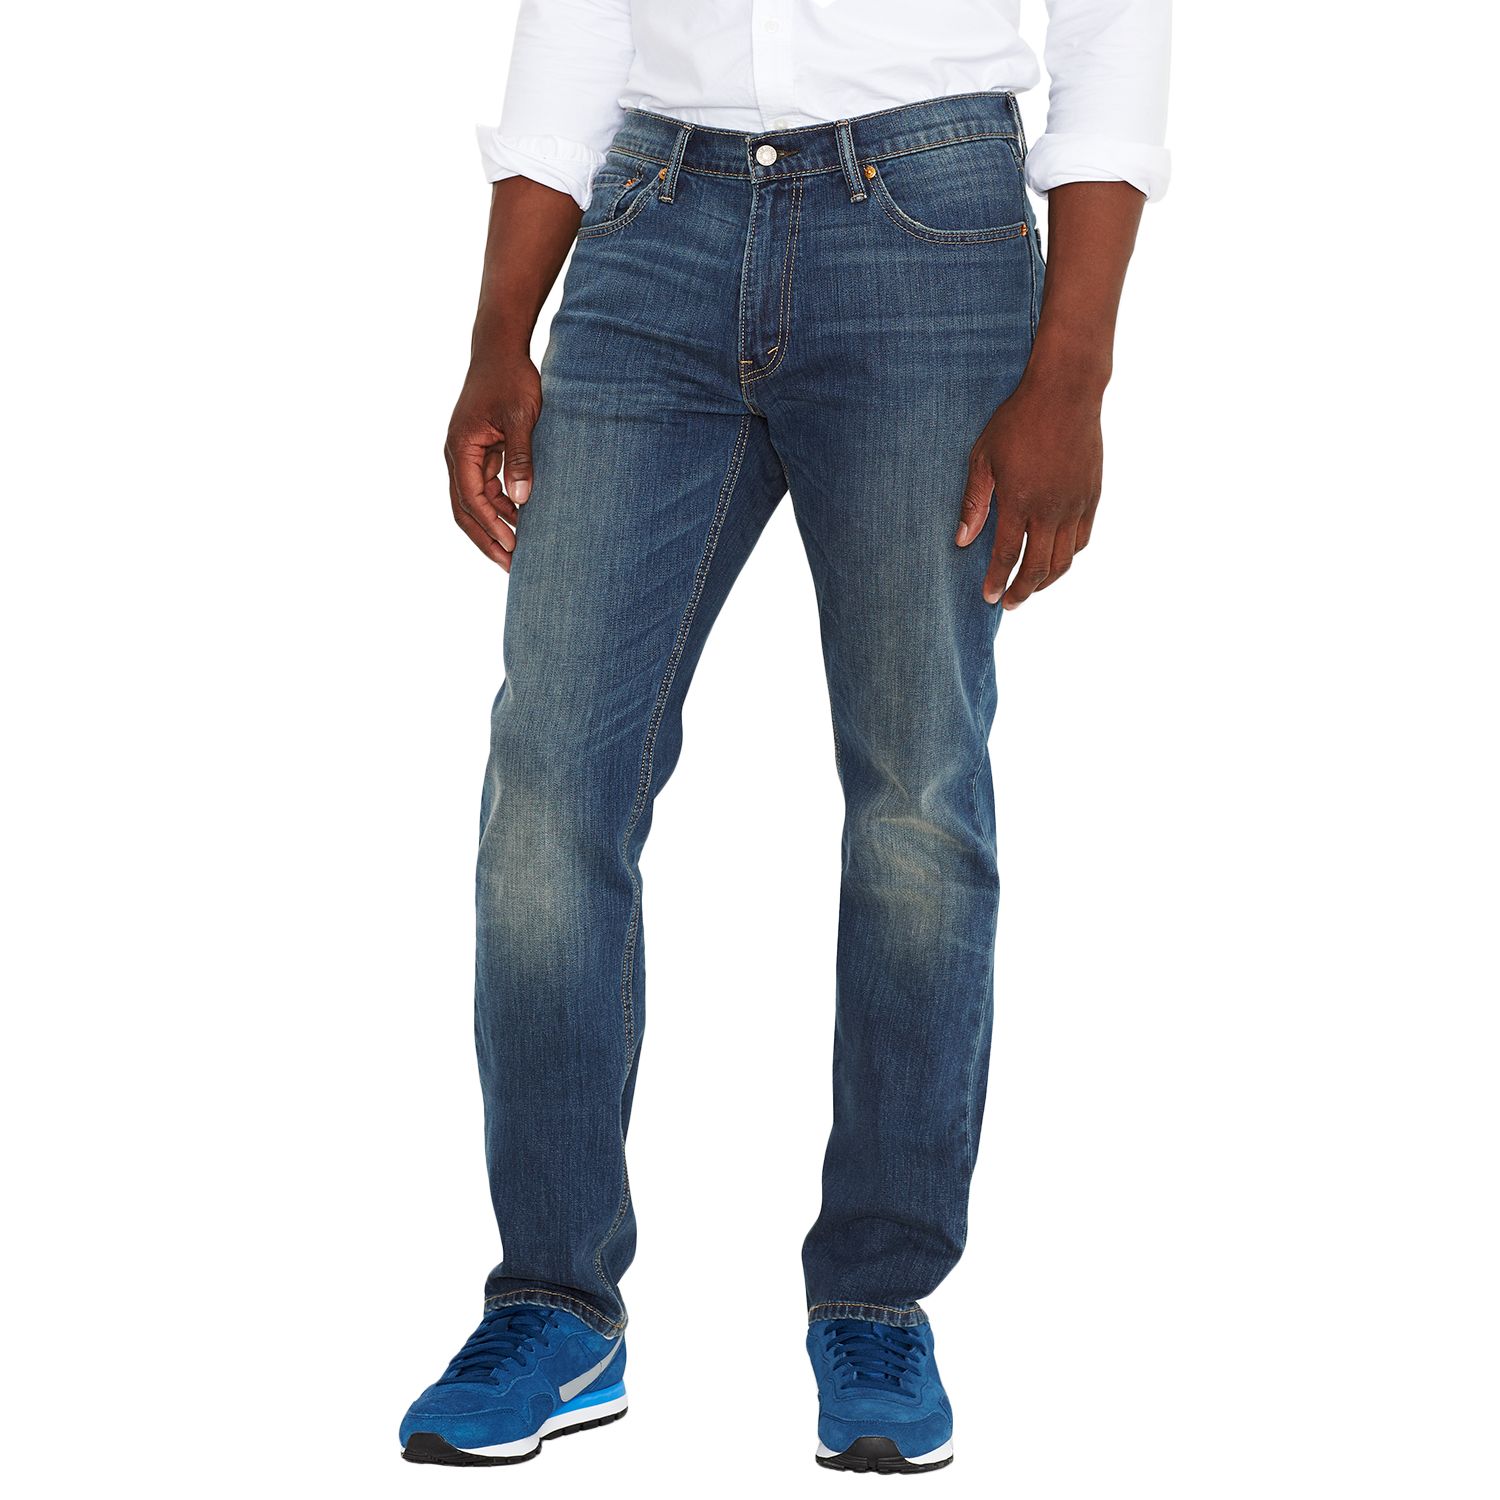 levi strauss 541 athletic fit